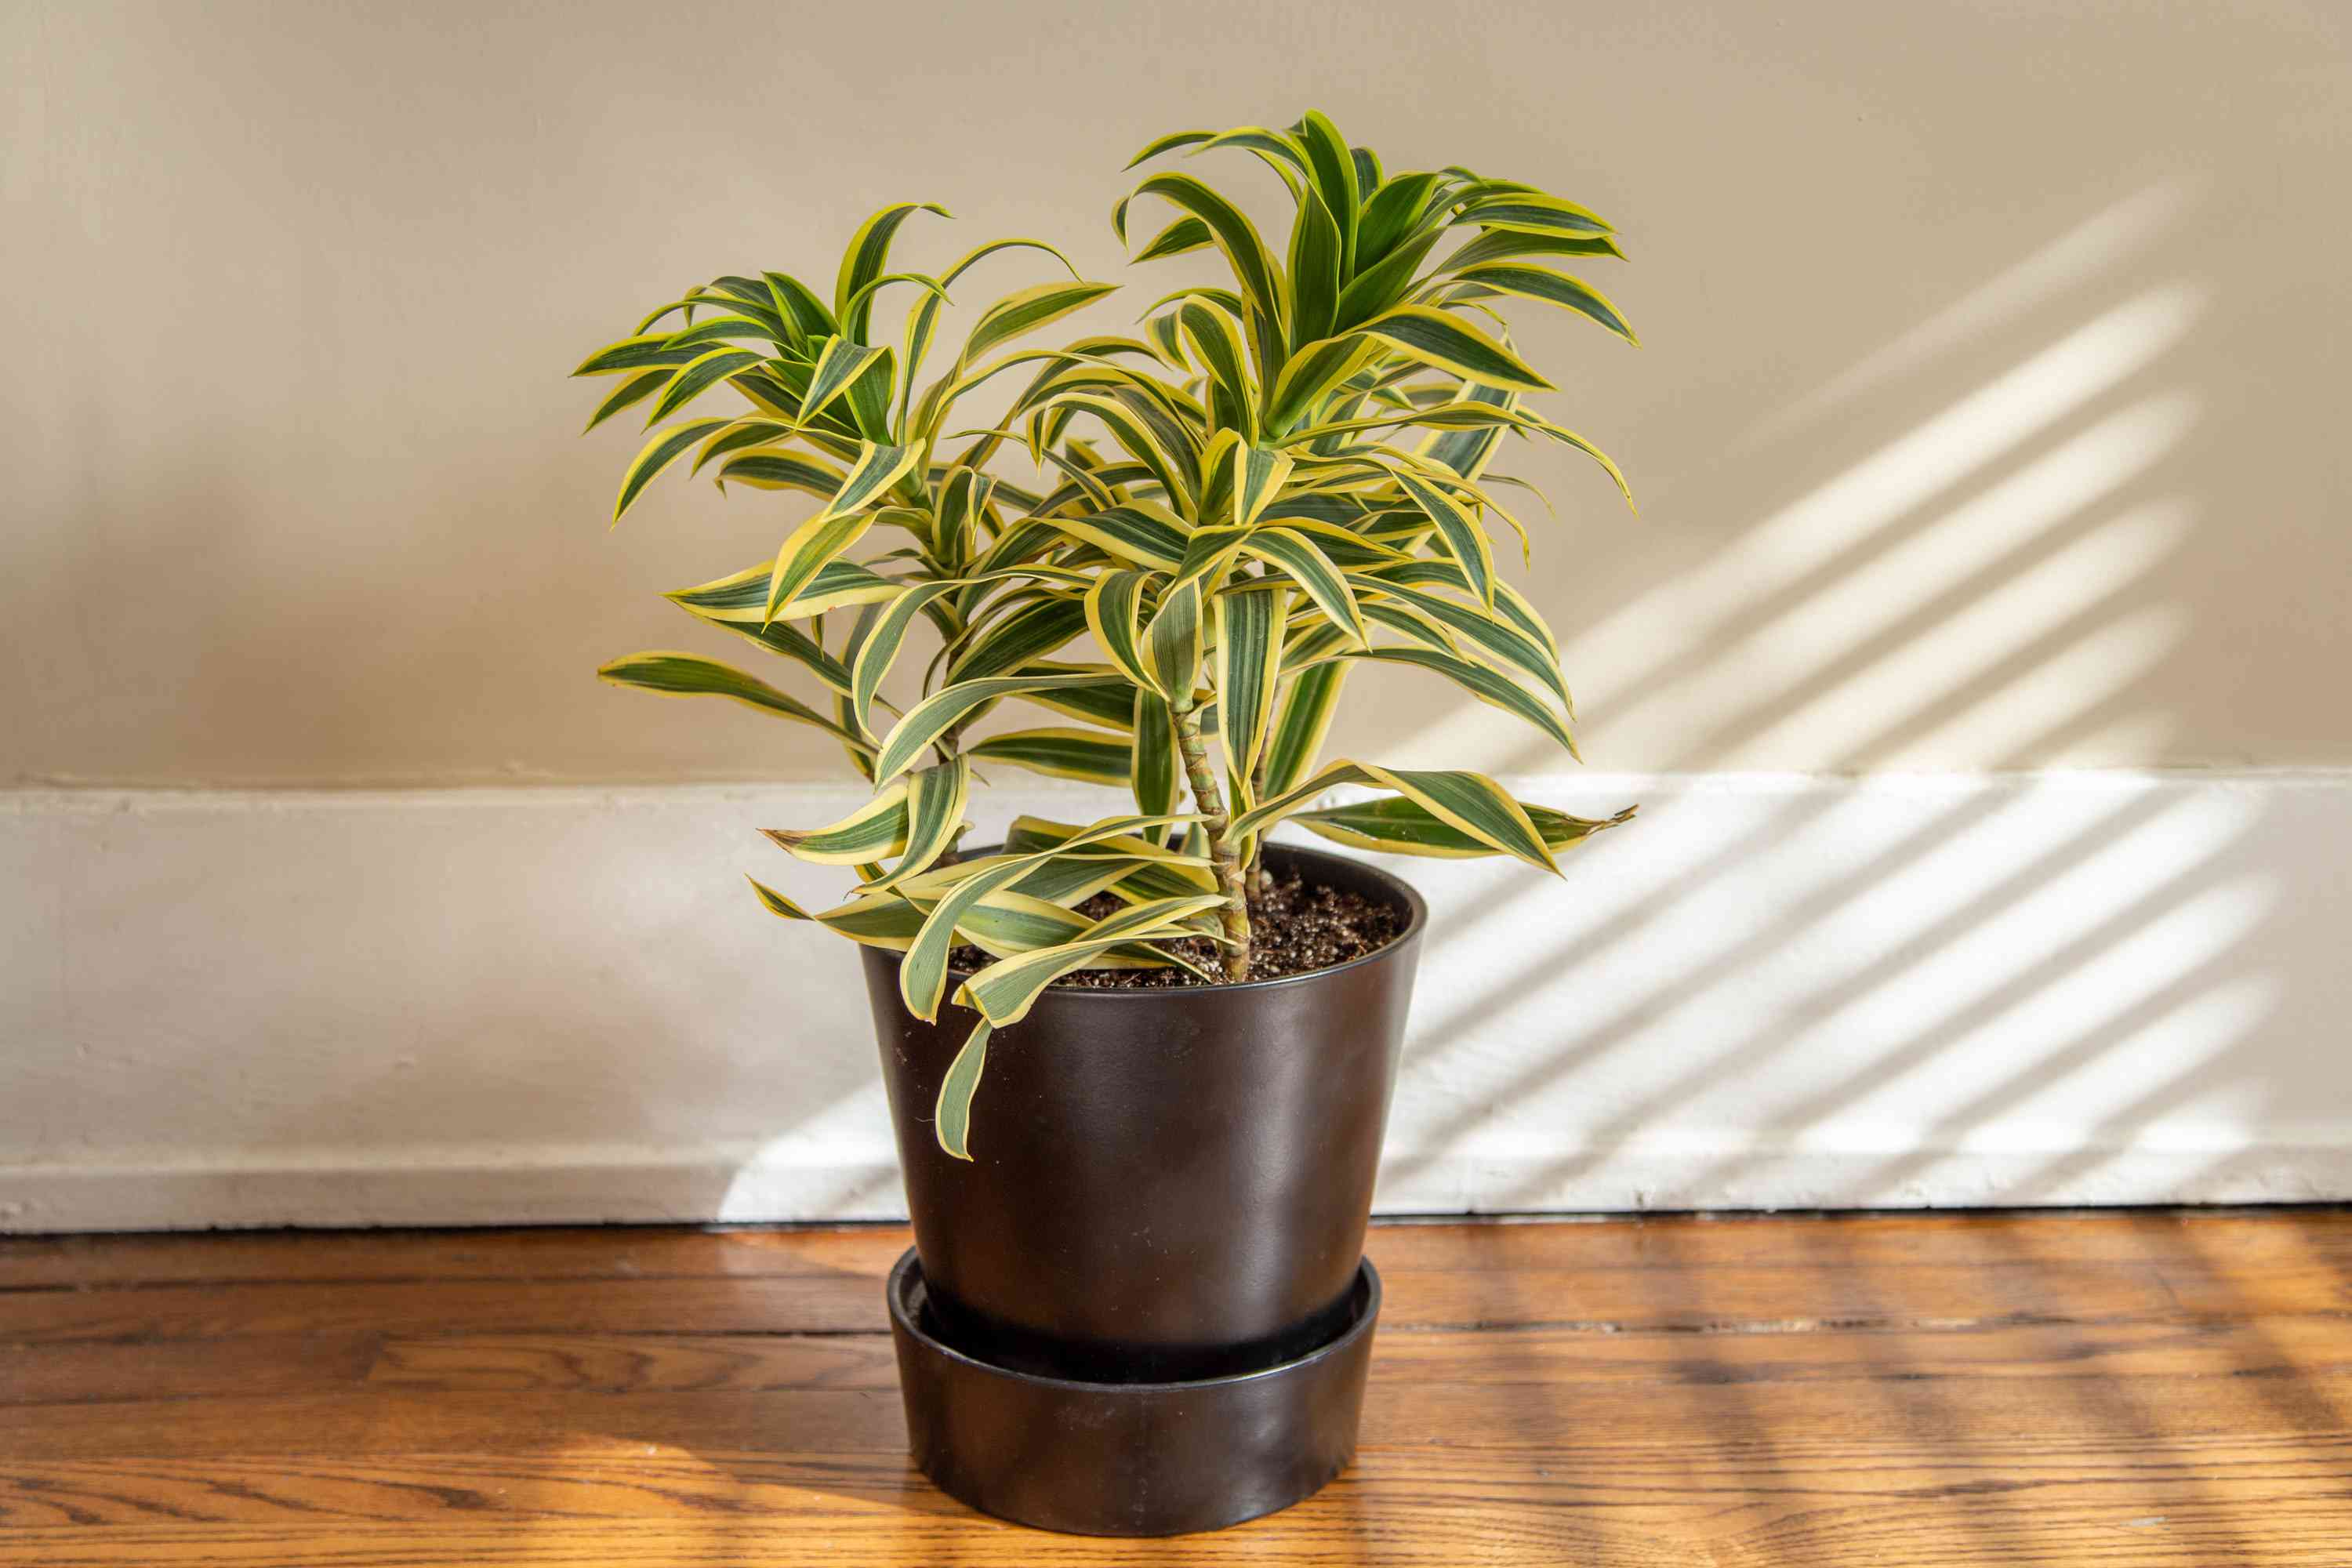 Song of India Variegated Plant | Indoor Plant | Low Maintenance Plant - Gardengram